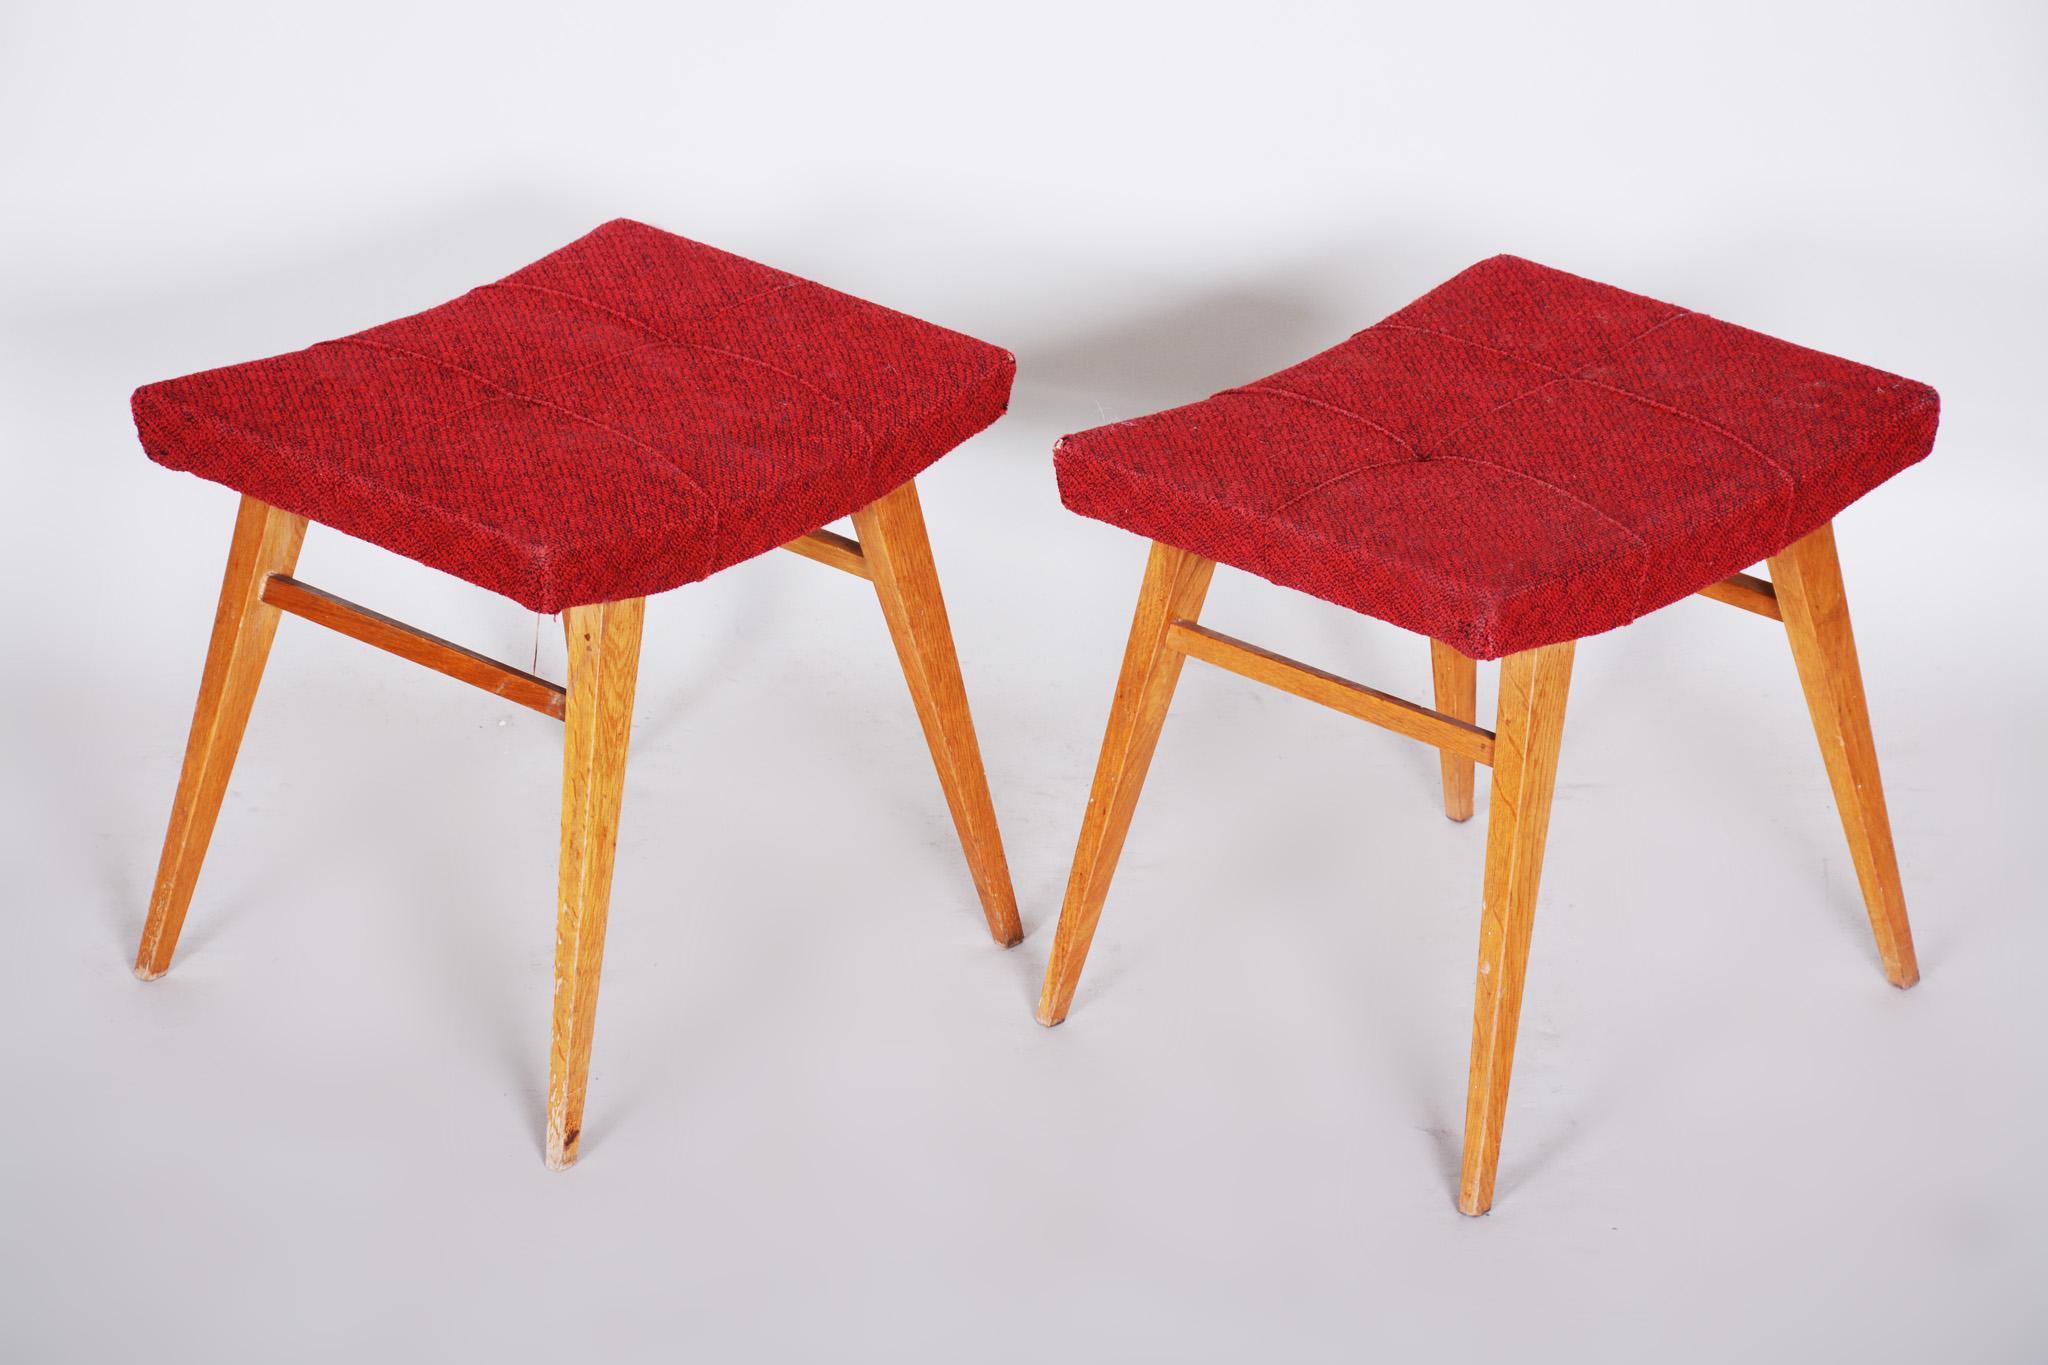 Czech Pair of Midcentury Red Beech Stools, 1960s, Original Preserved Condition For Sale